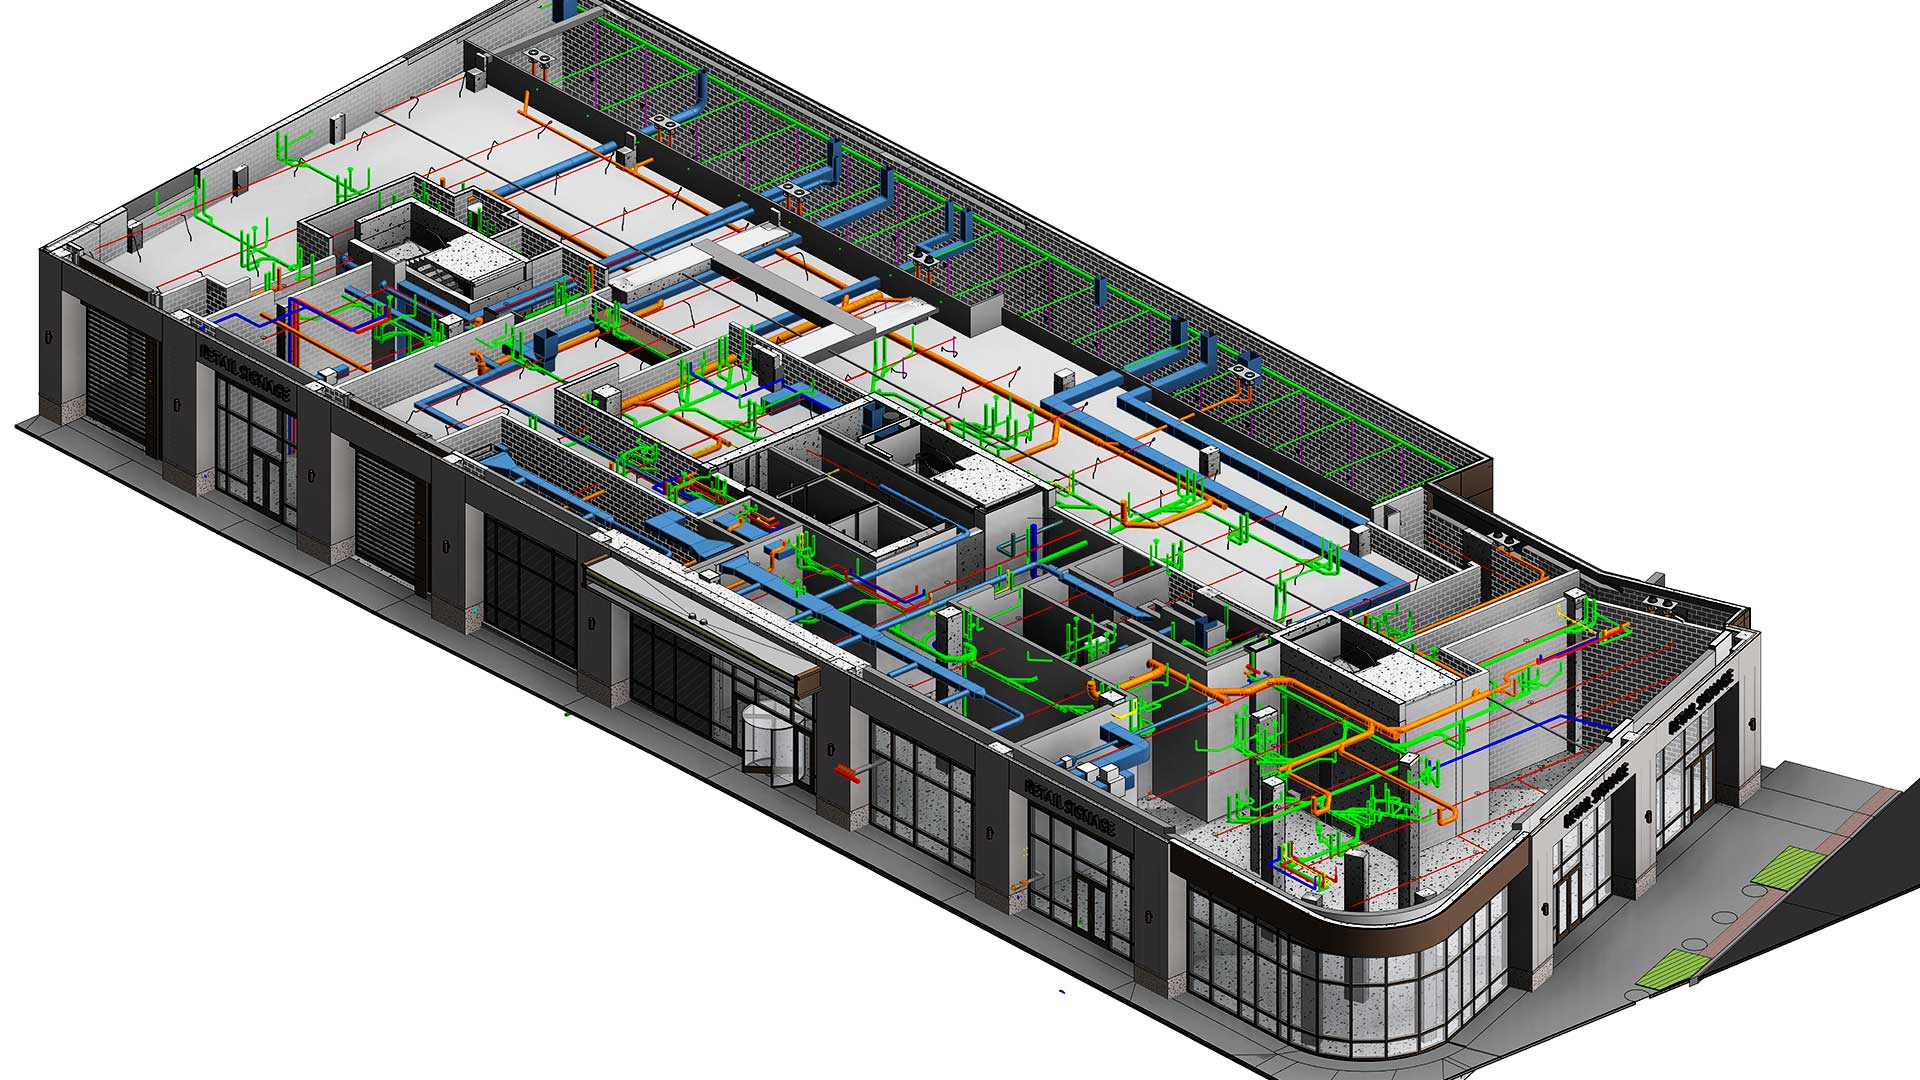 Plumbing modeling for a residential tower in New Jersey